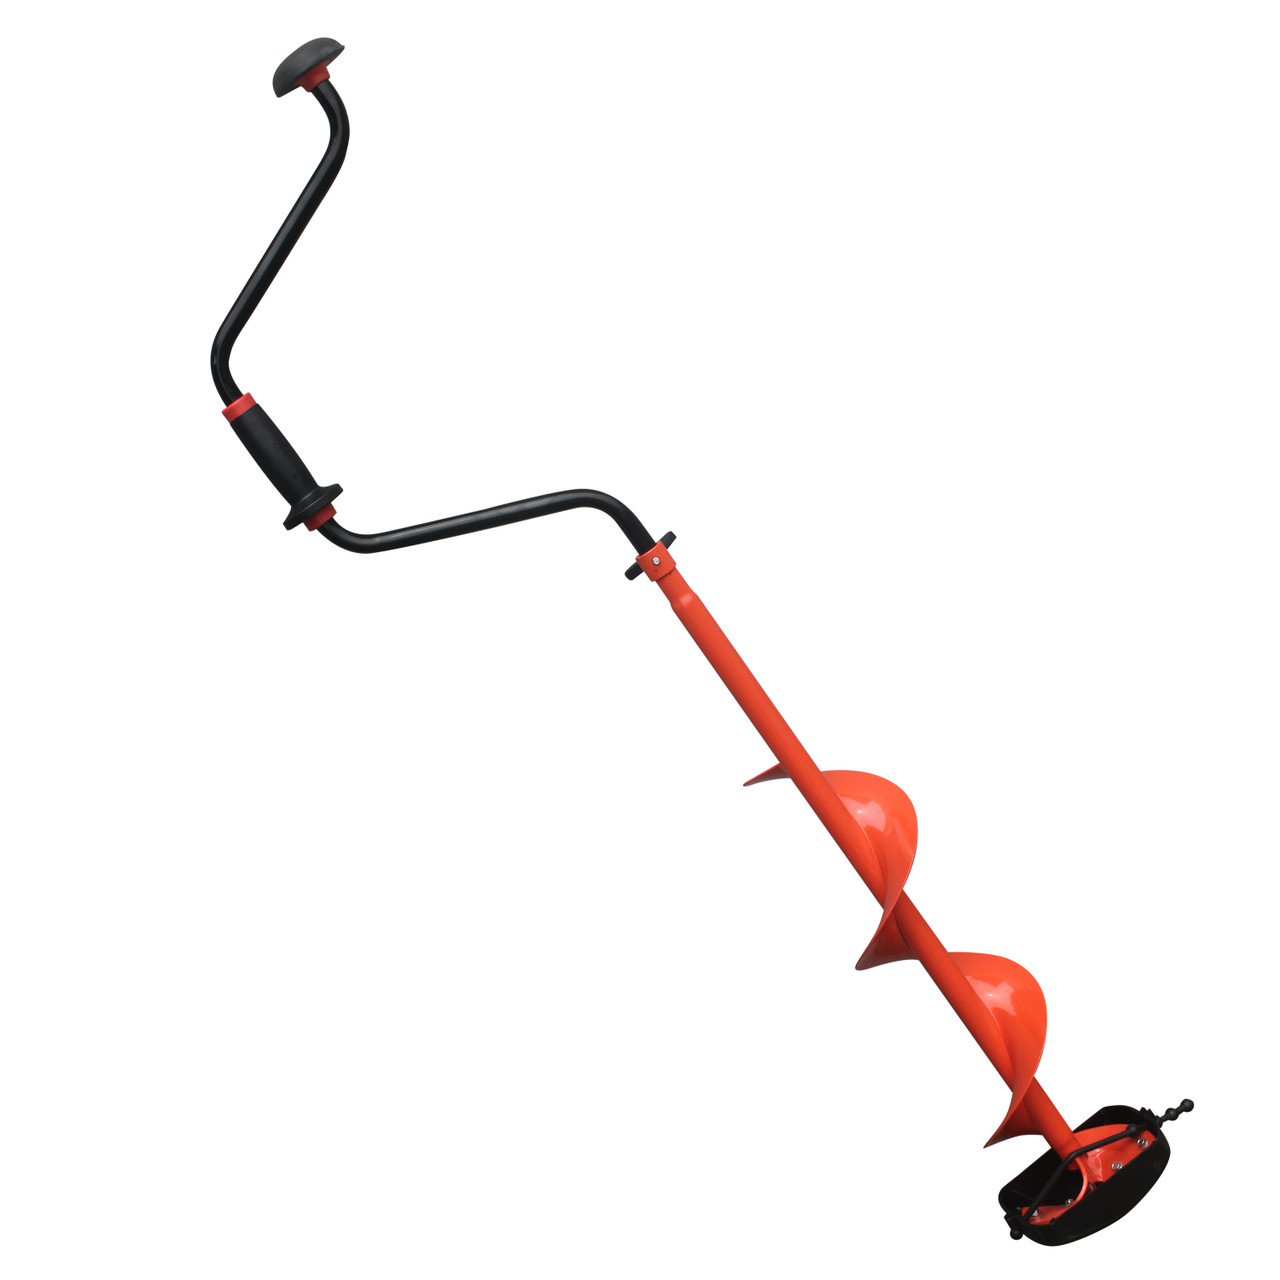 6 INCH ARCTIC EXPRESS ICE AUGER 